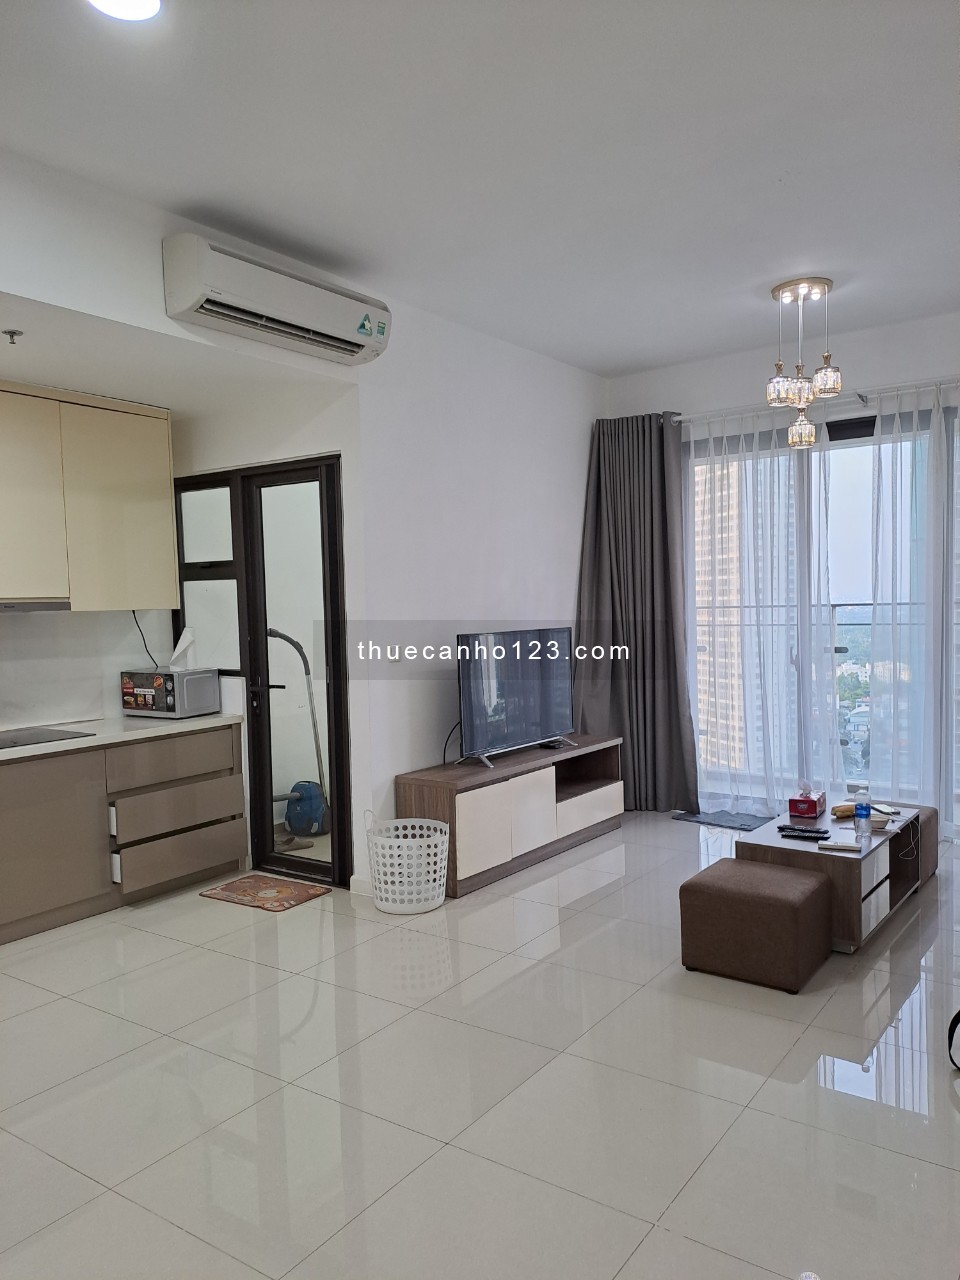 Nice Appartment for rent, 2 Bedroom, 1.600USD/Month, Good Facilities